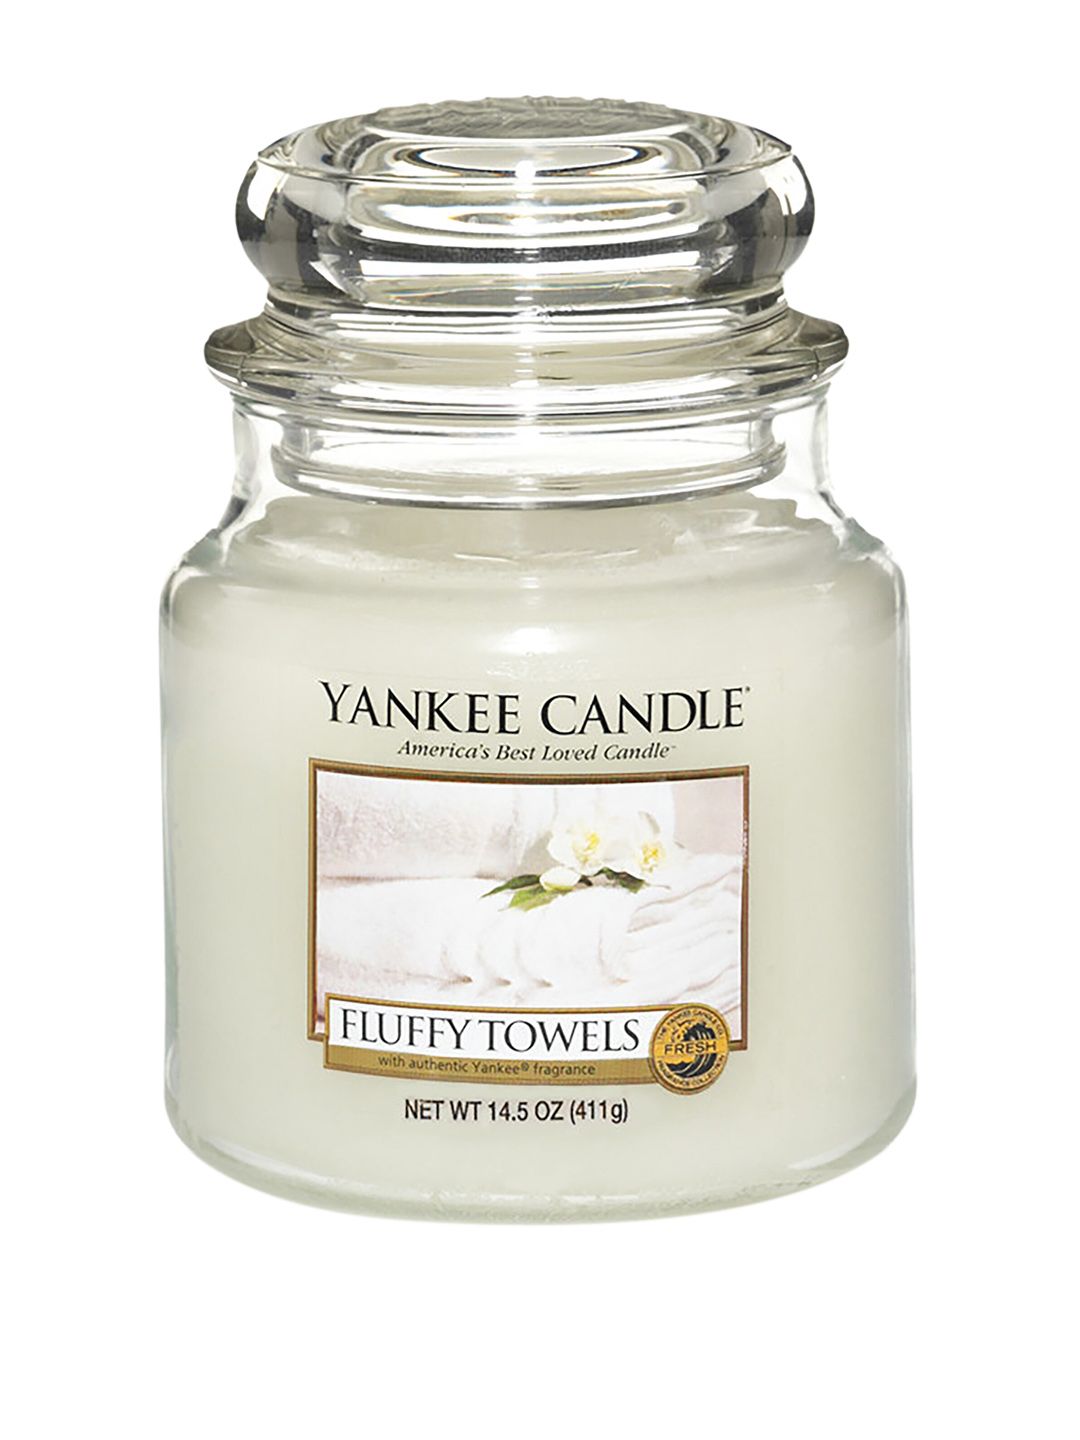 YANKEE CANDLE White Classic Medium Jar Fluffy Towels Scented Candles Price in India